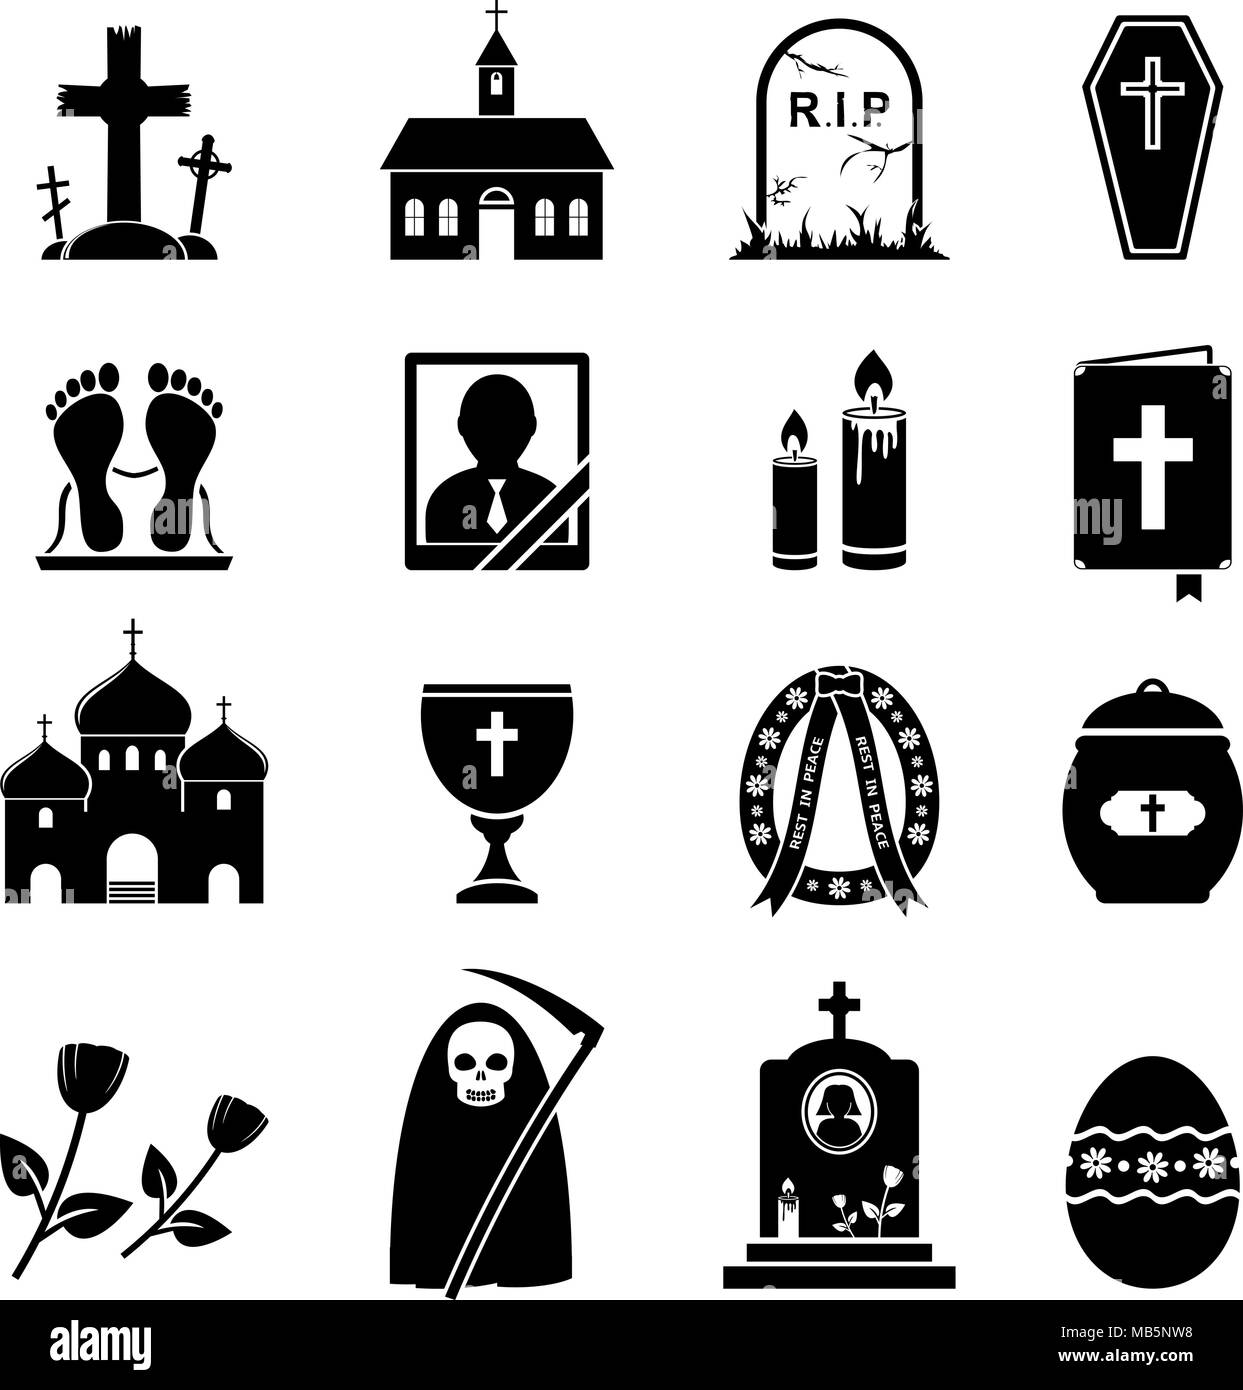 RIP icons Stock Vector